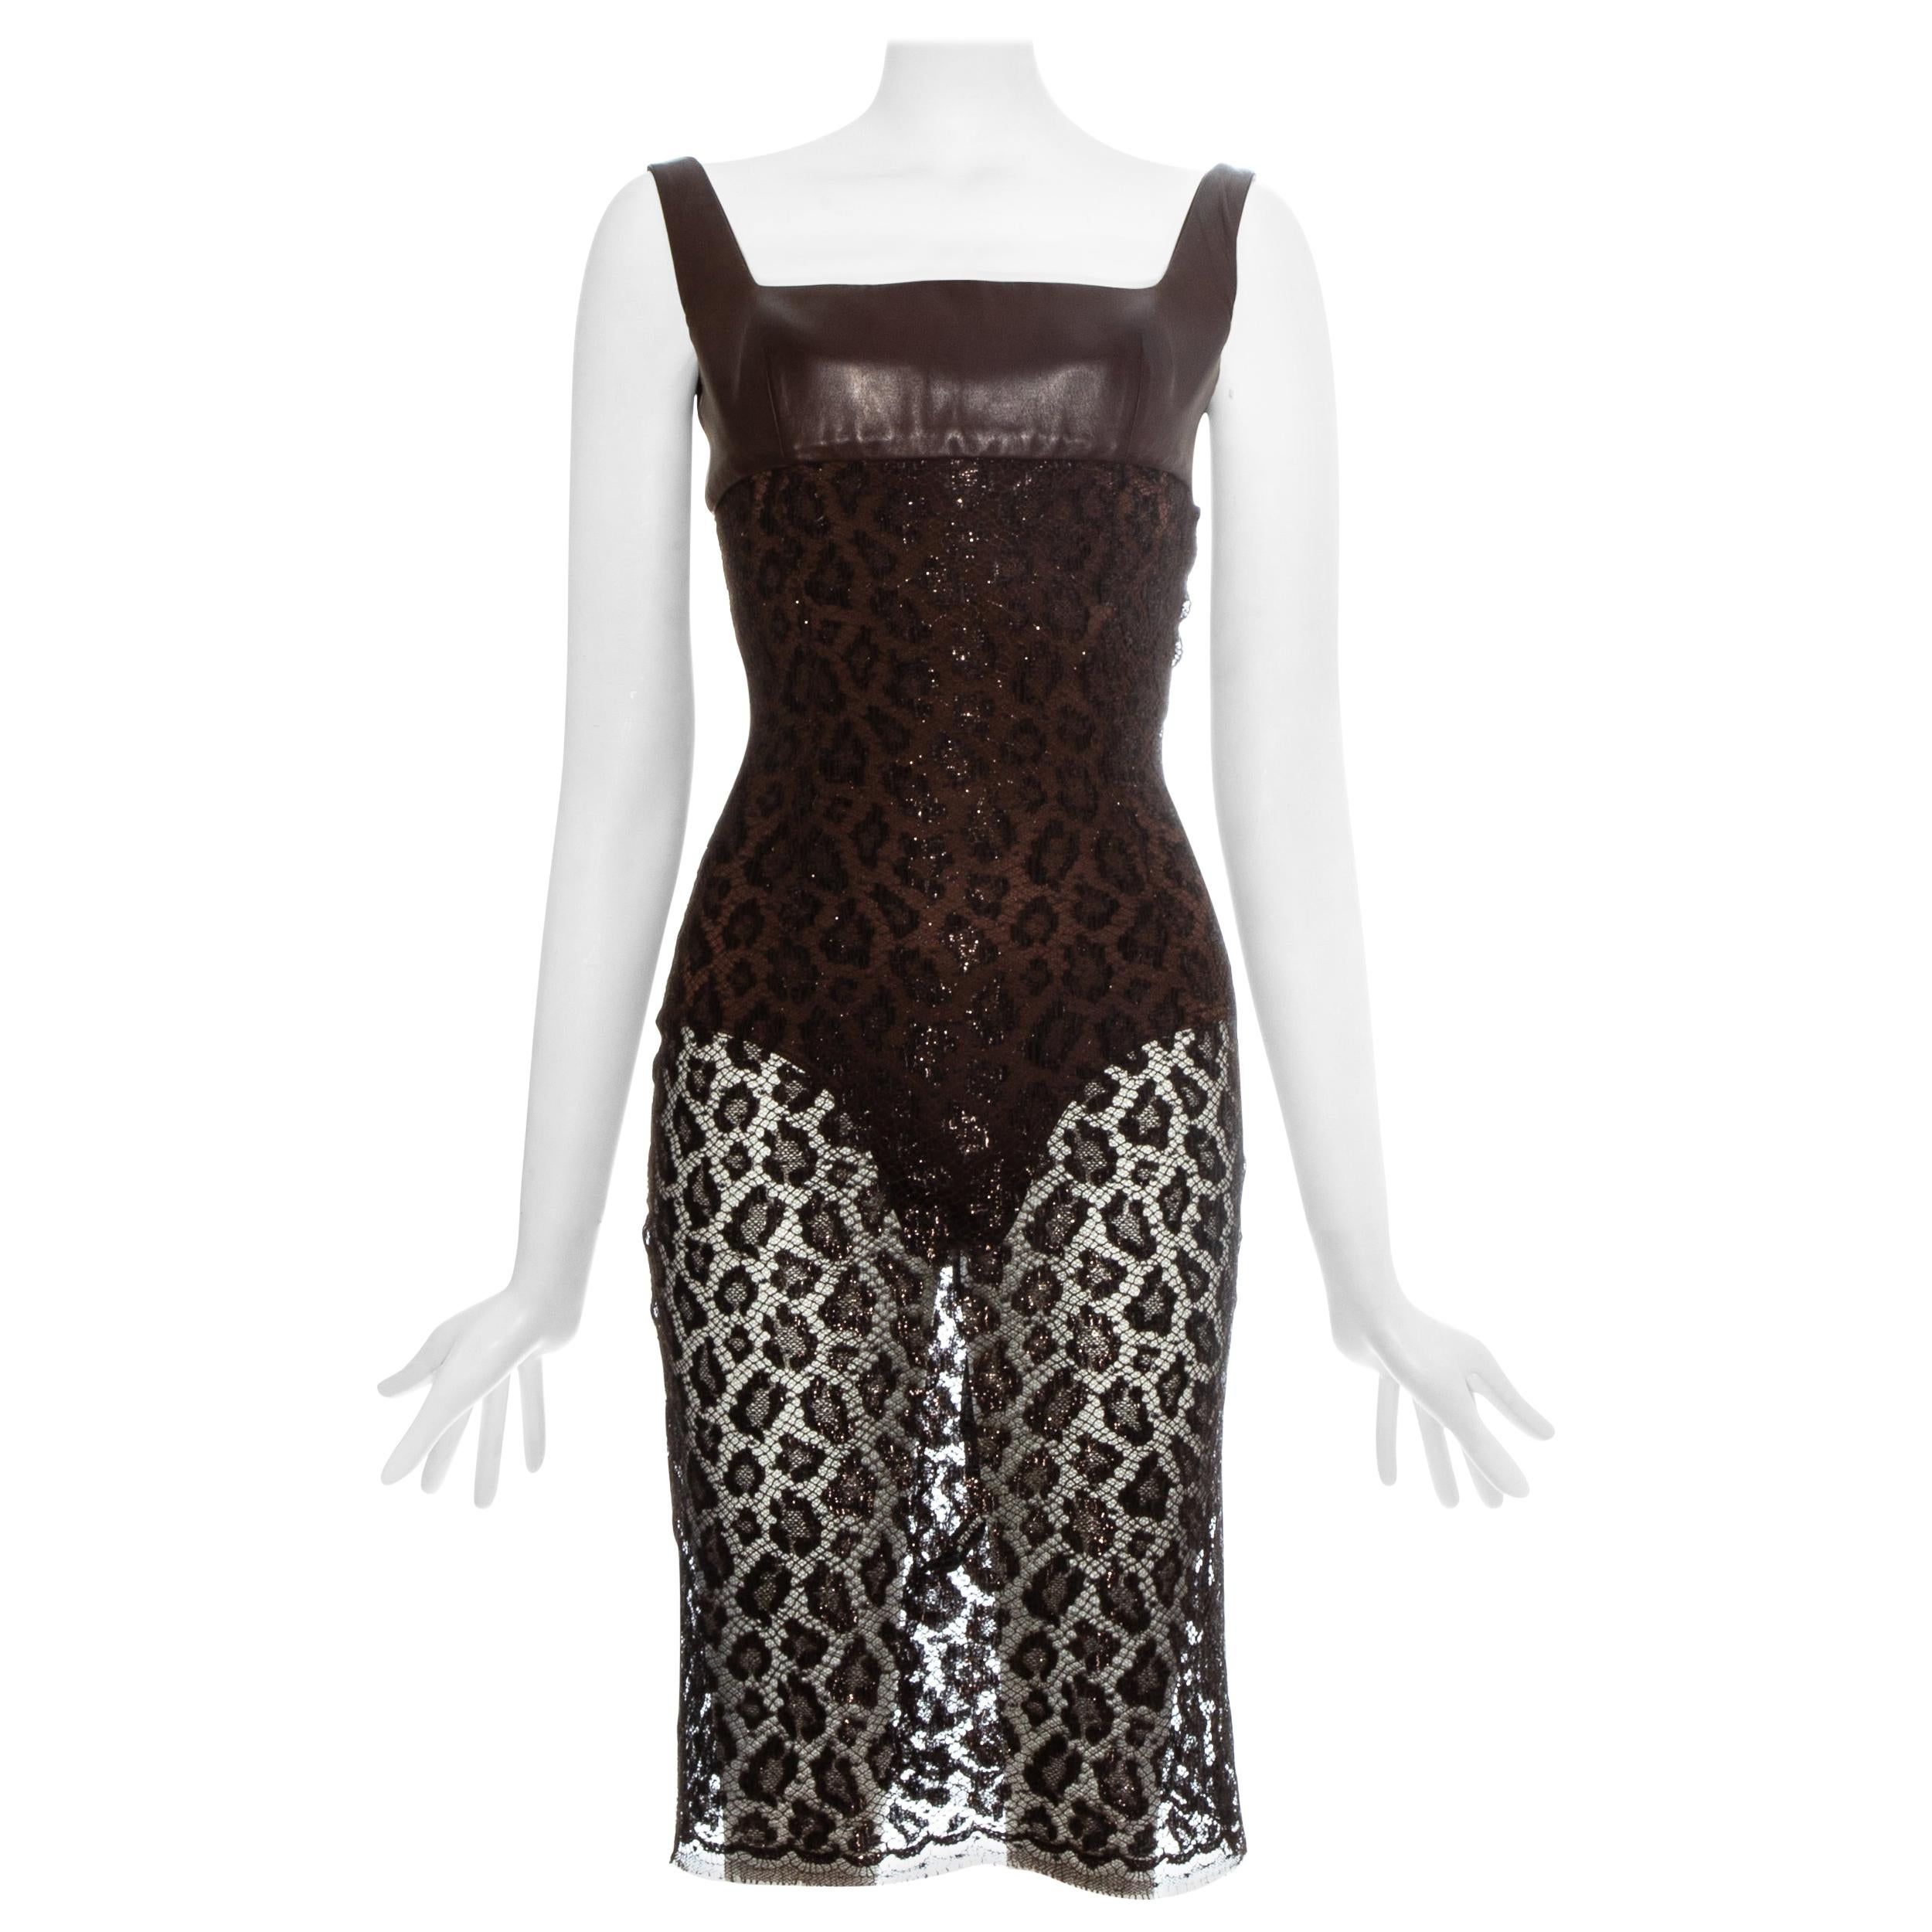 Atelier Versace brown leopard lamé lace and leather couture dress, ss 1996 For Sale